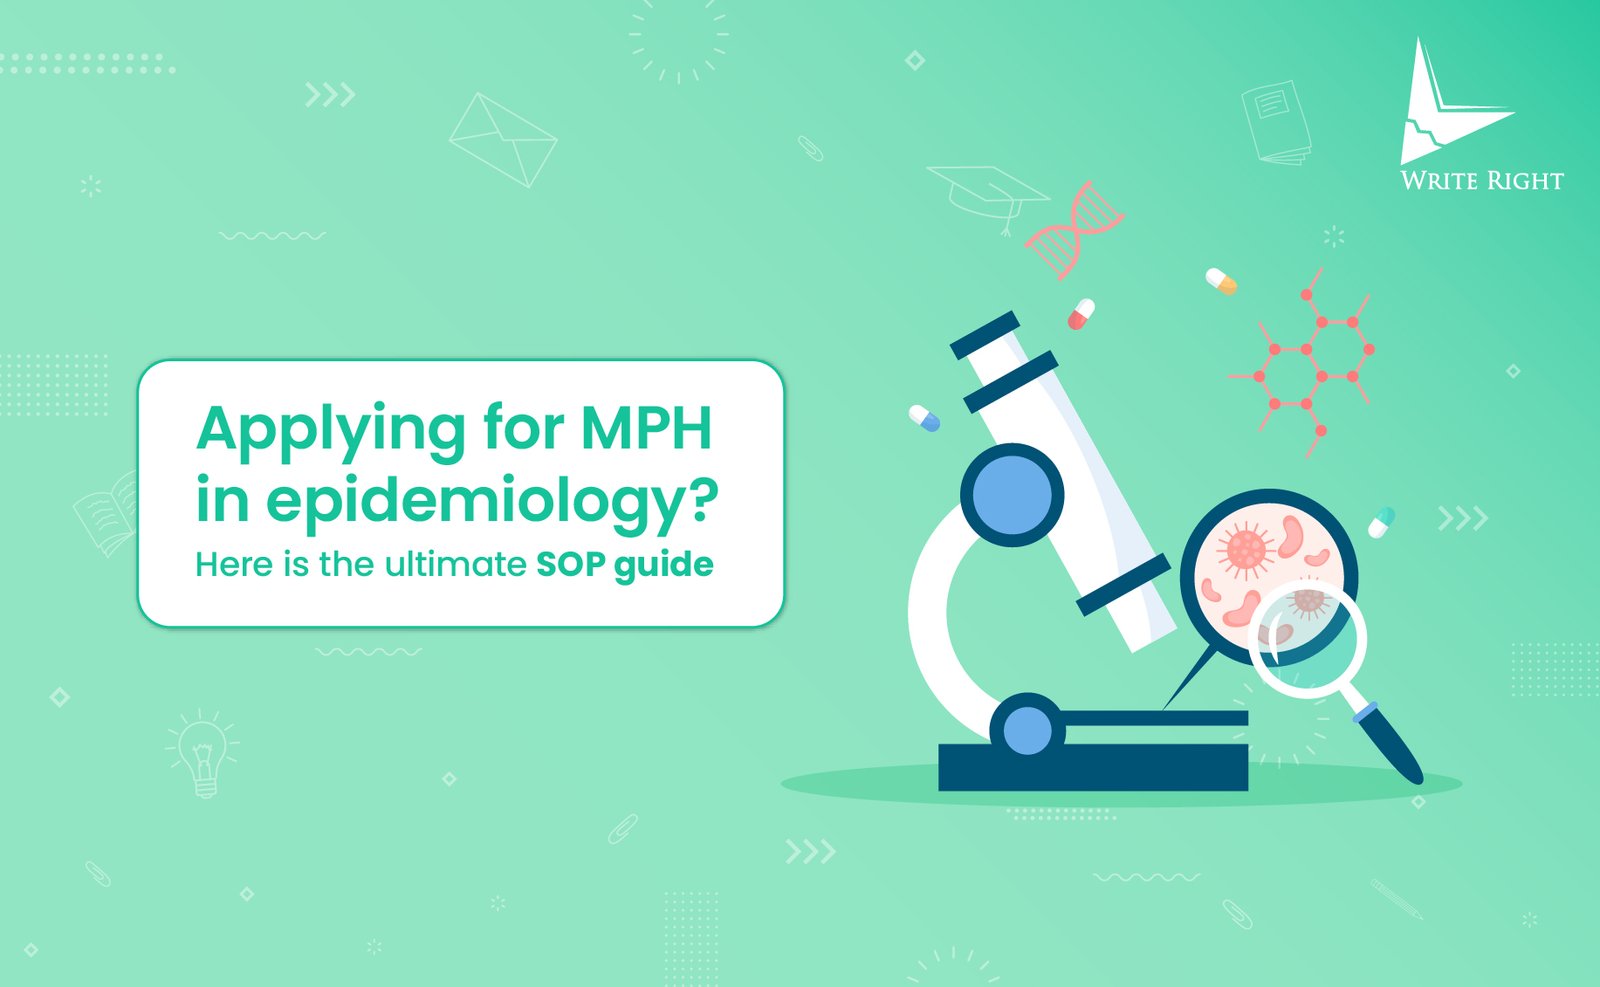 Applying for MPH in Epidemiology? Here is the Ultimate Guide to SOP for Public Health